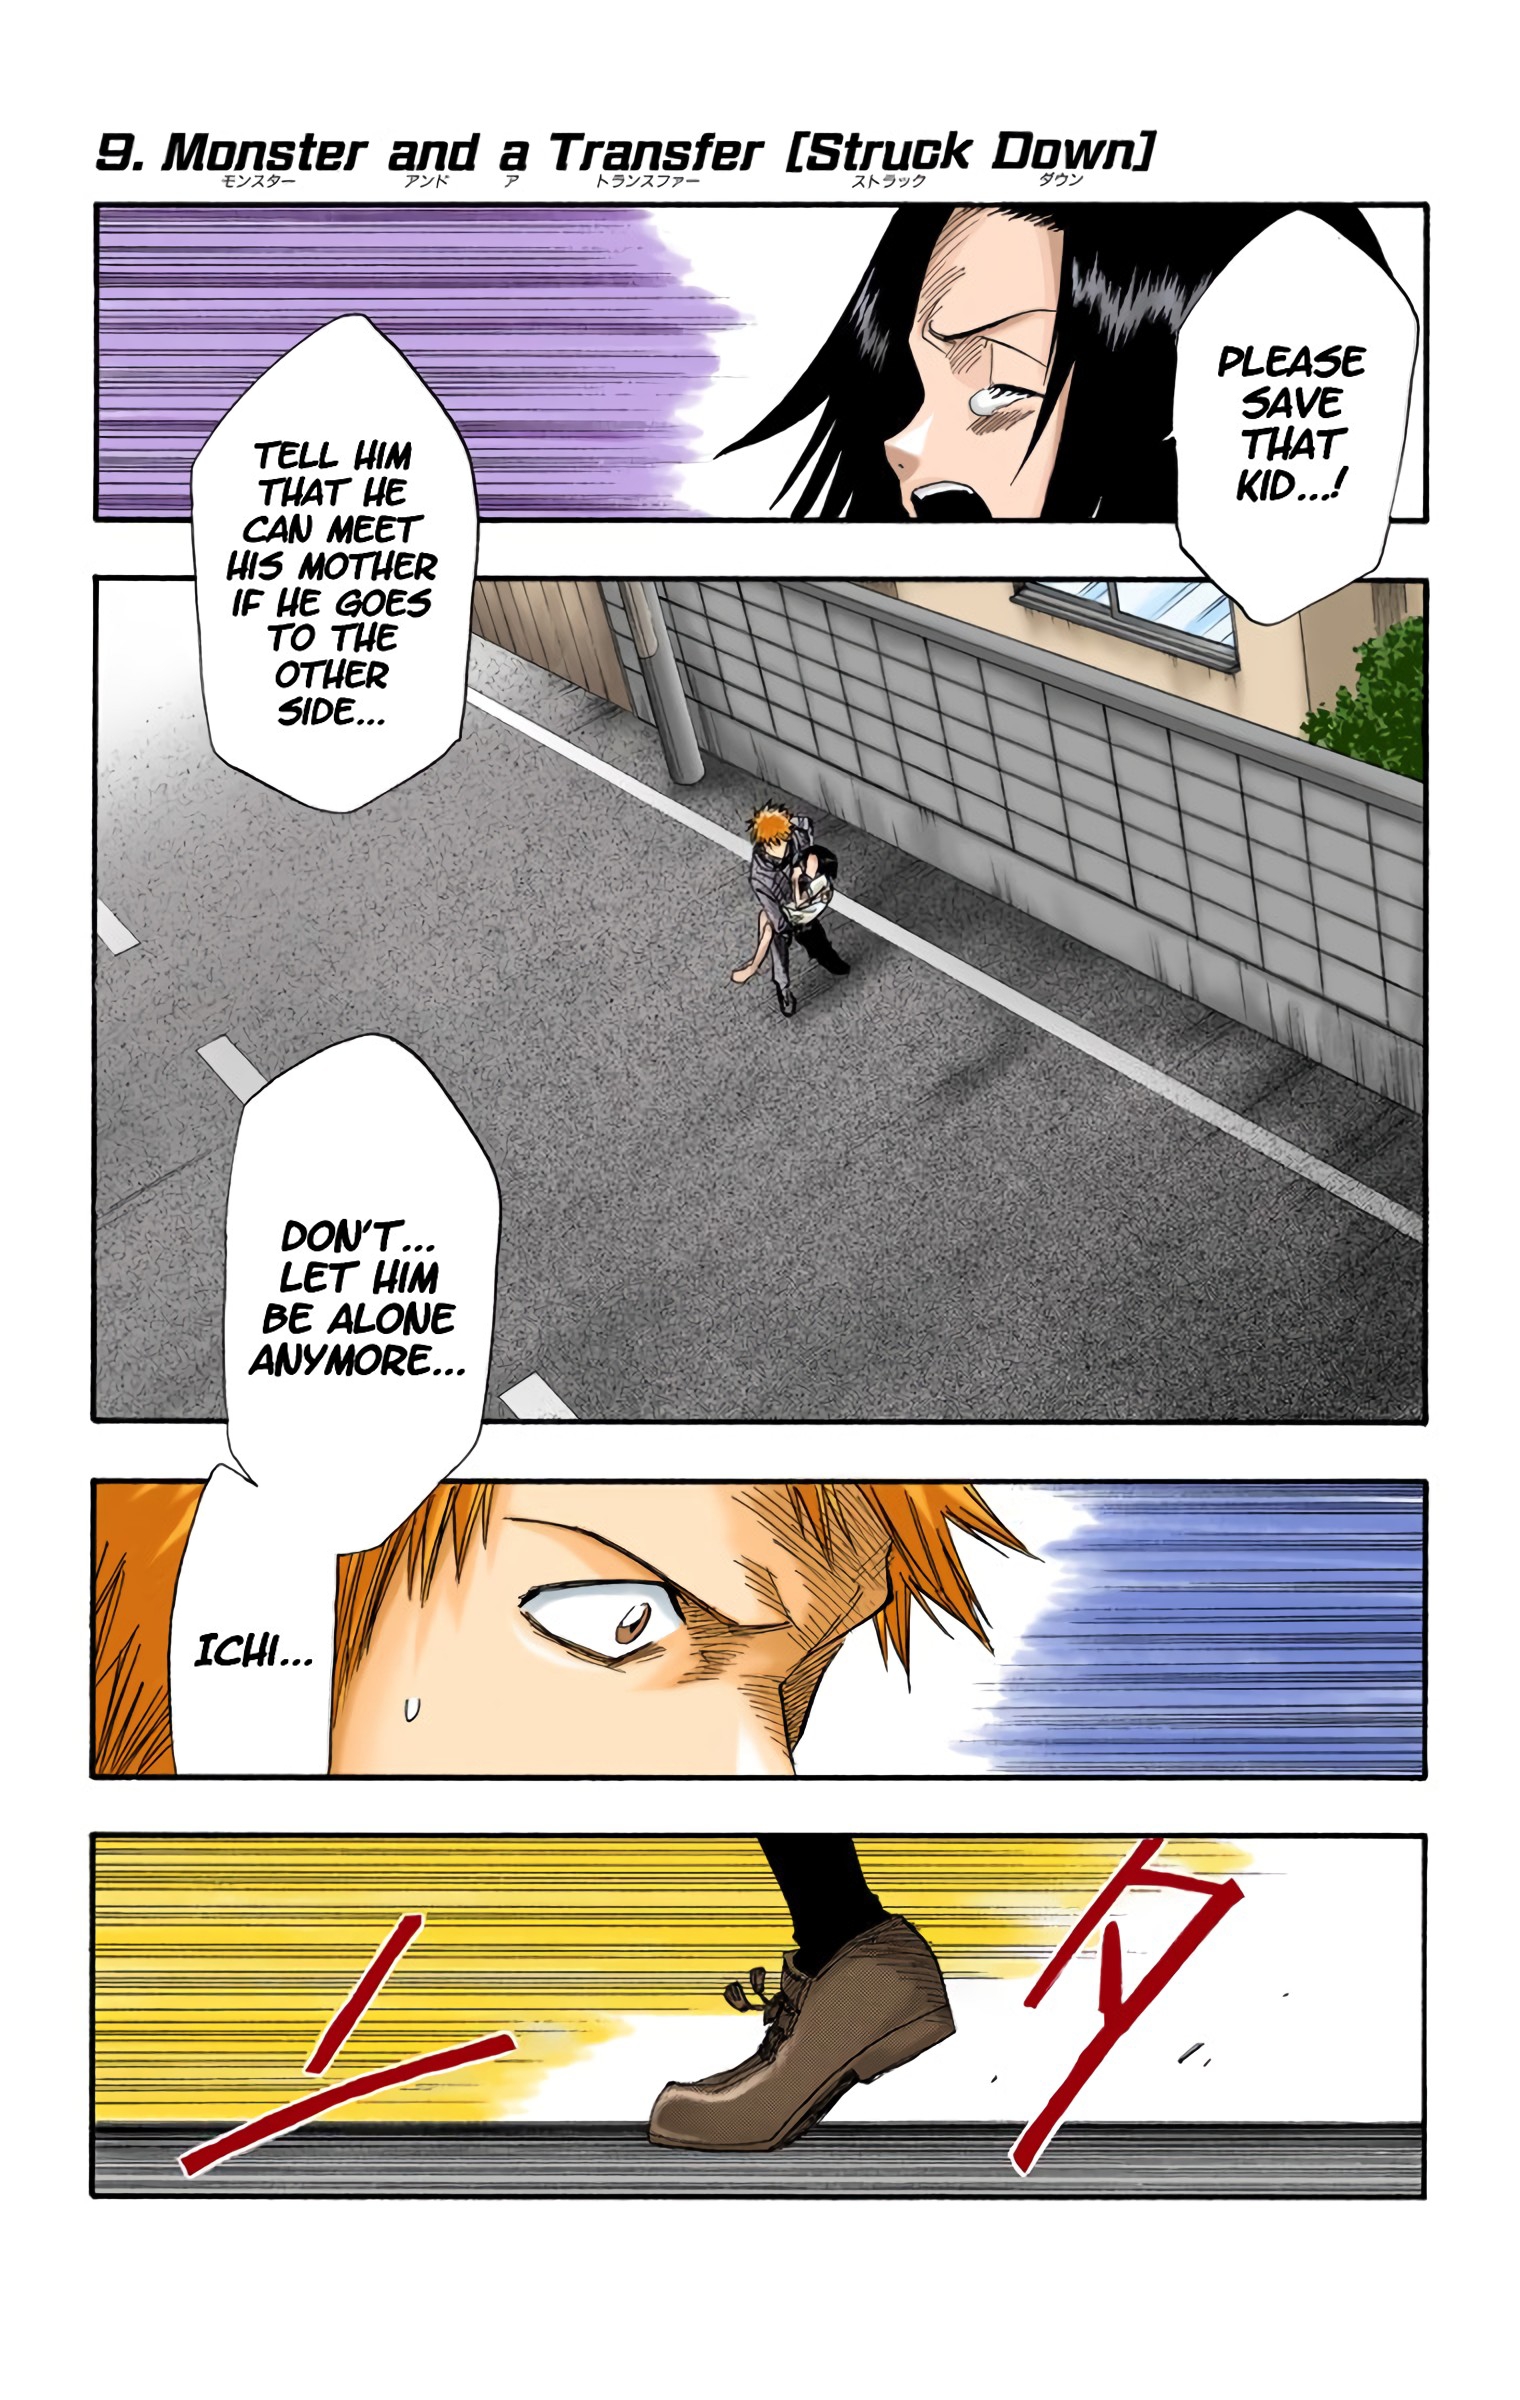 Bleach - Digital Colored Comics Vol.2 Chapter 9: Monster And A Transfer (Struck Down) - Picture 1